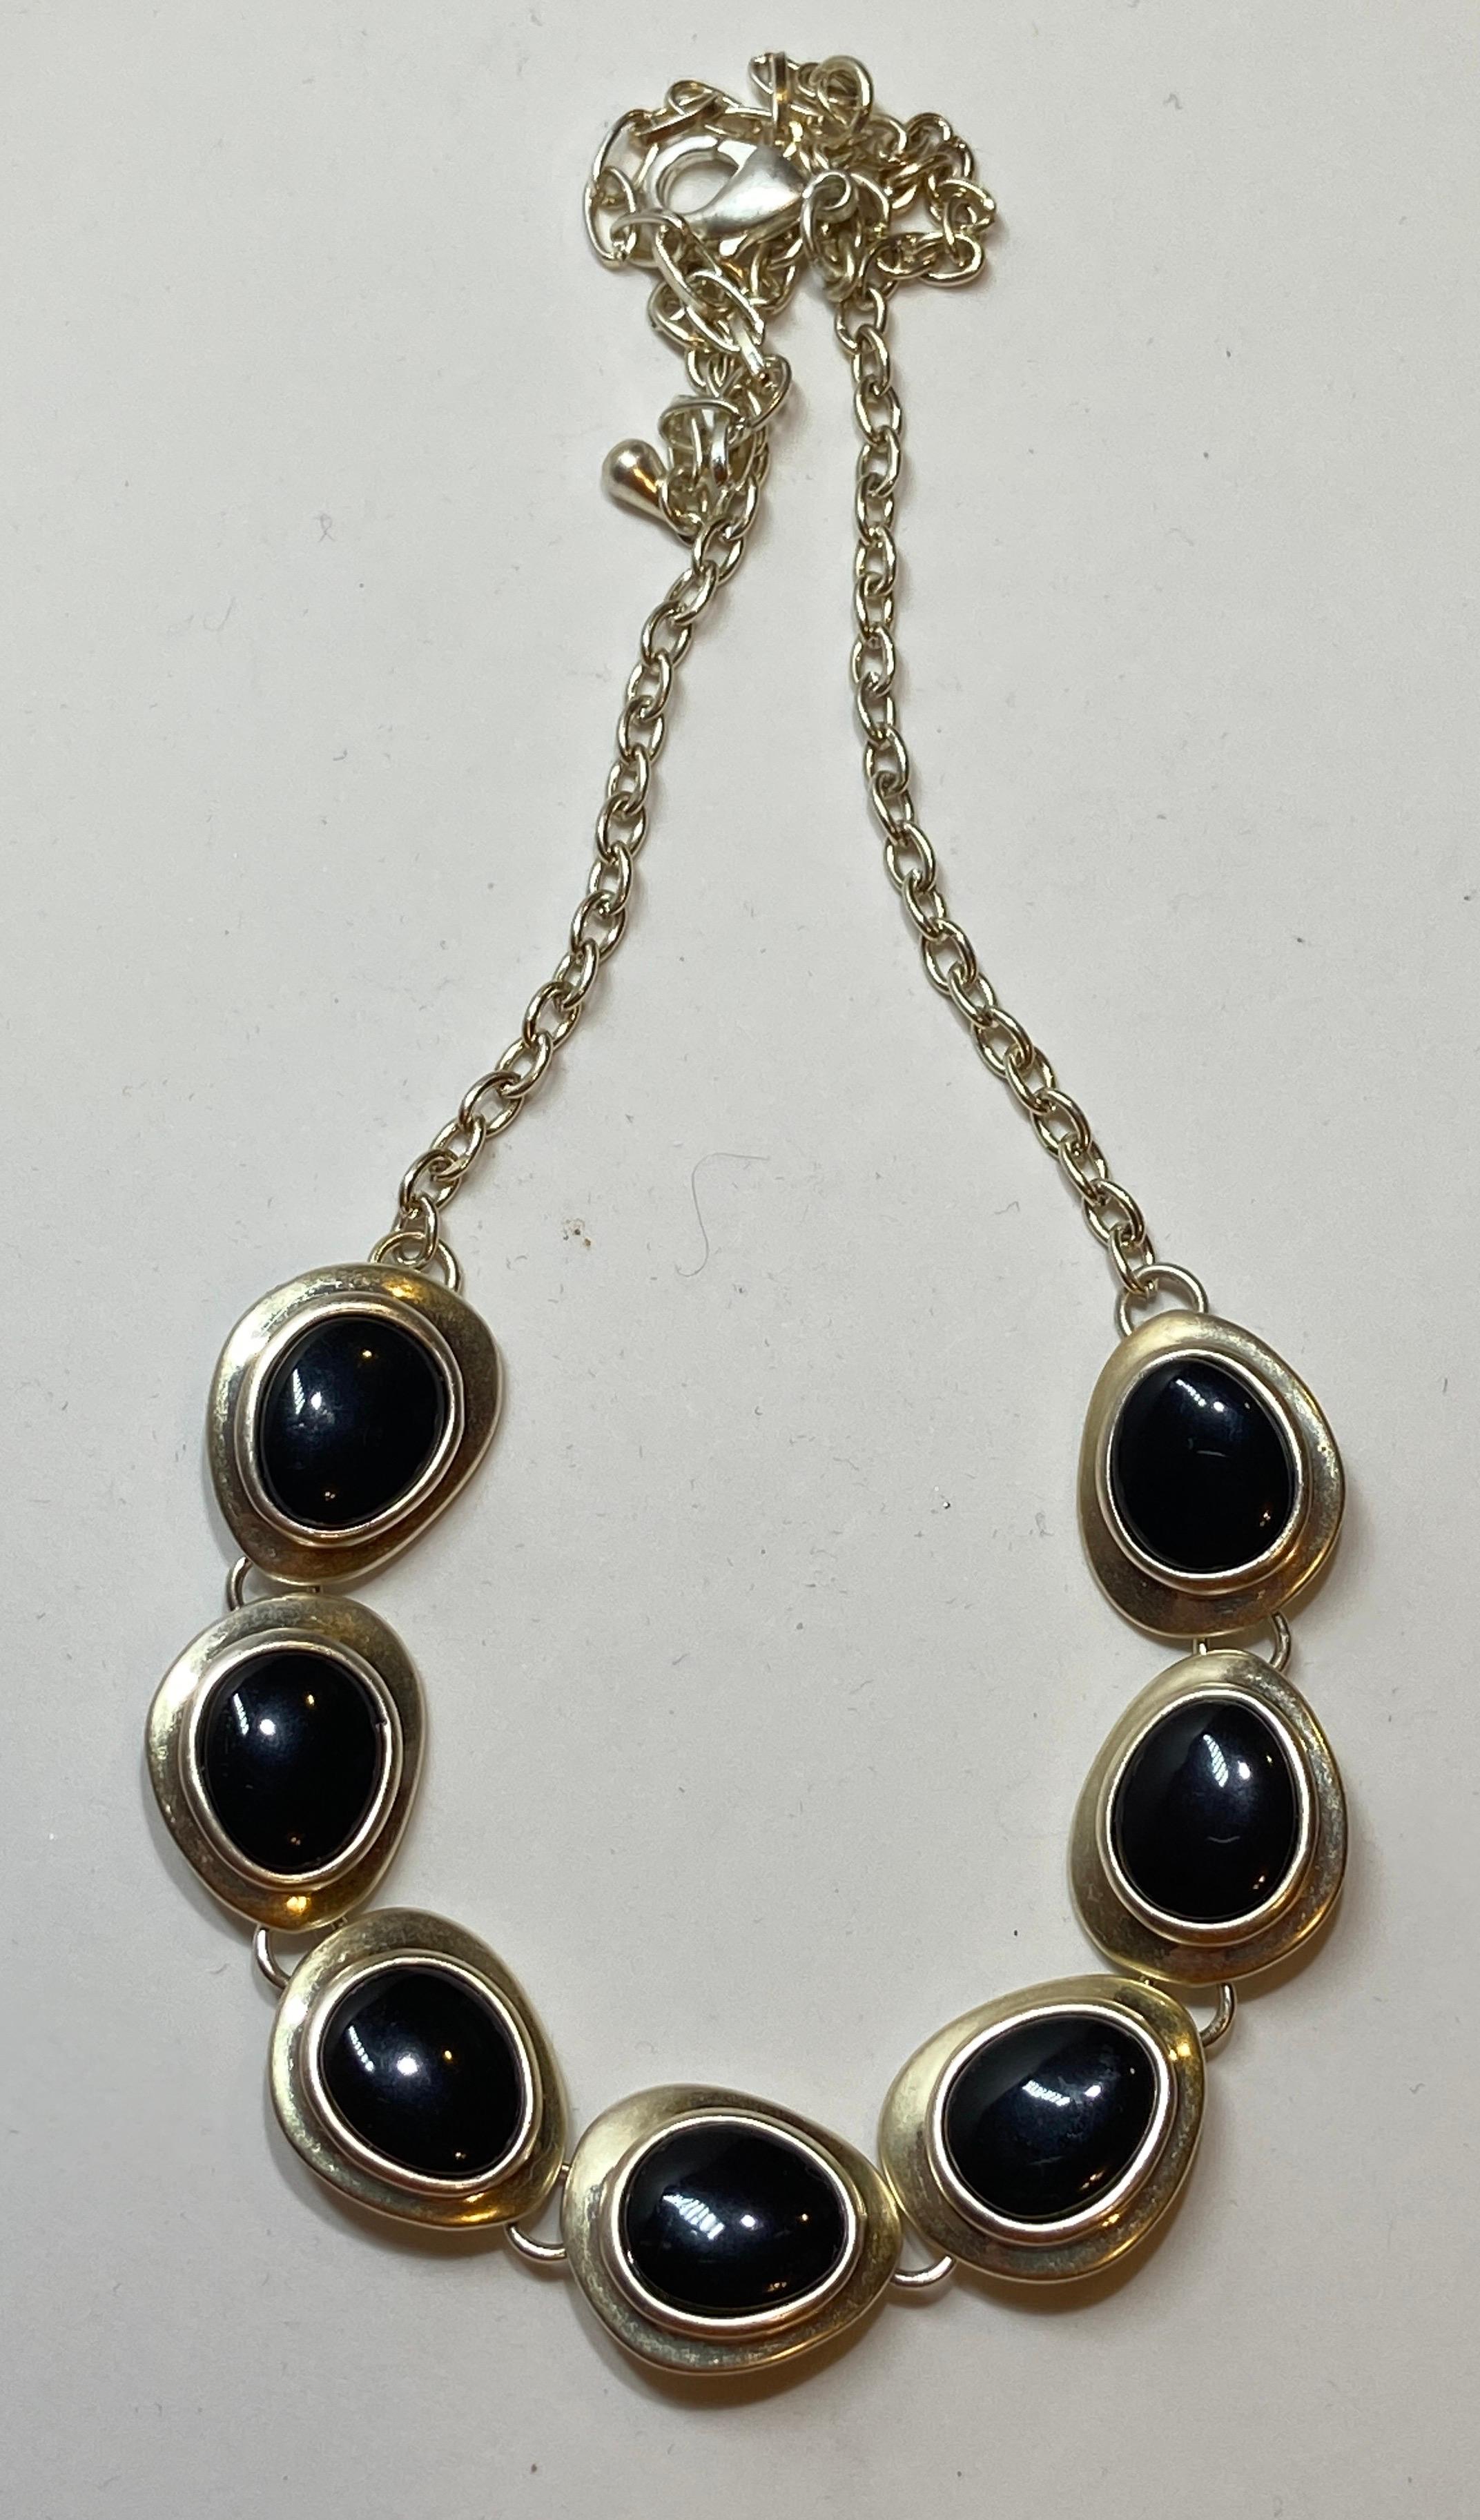 sterling silver frame pendant necklace with black onyx